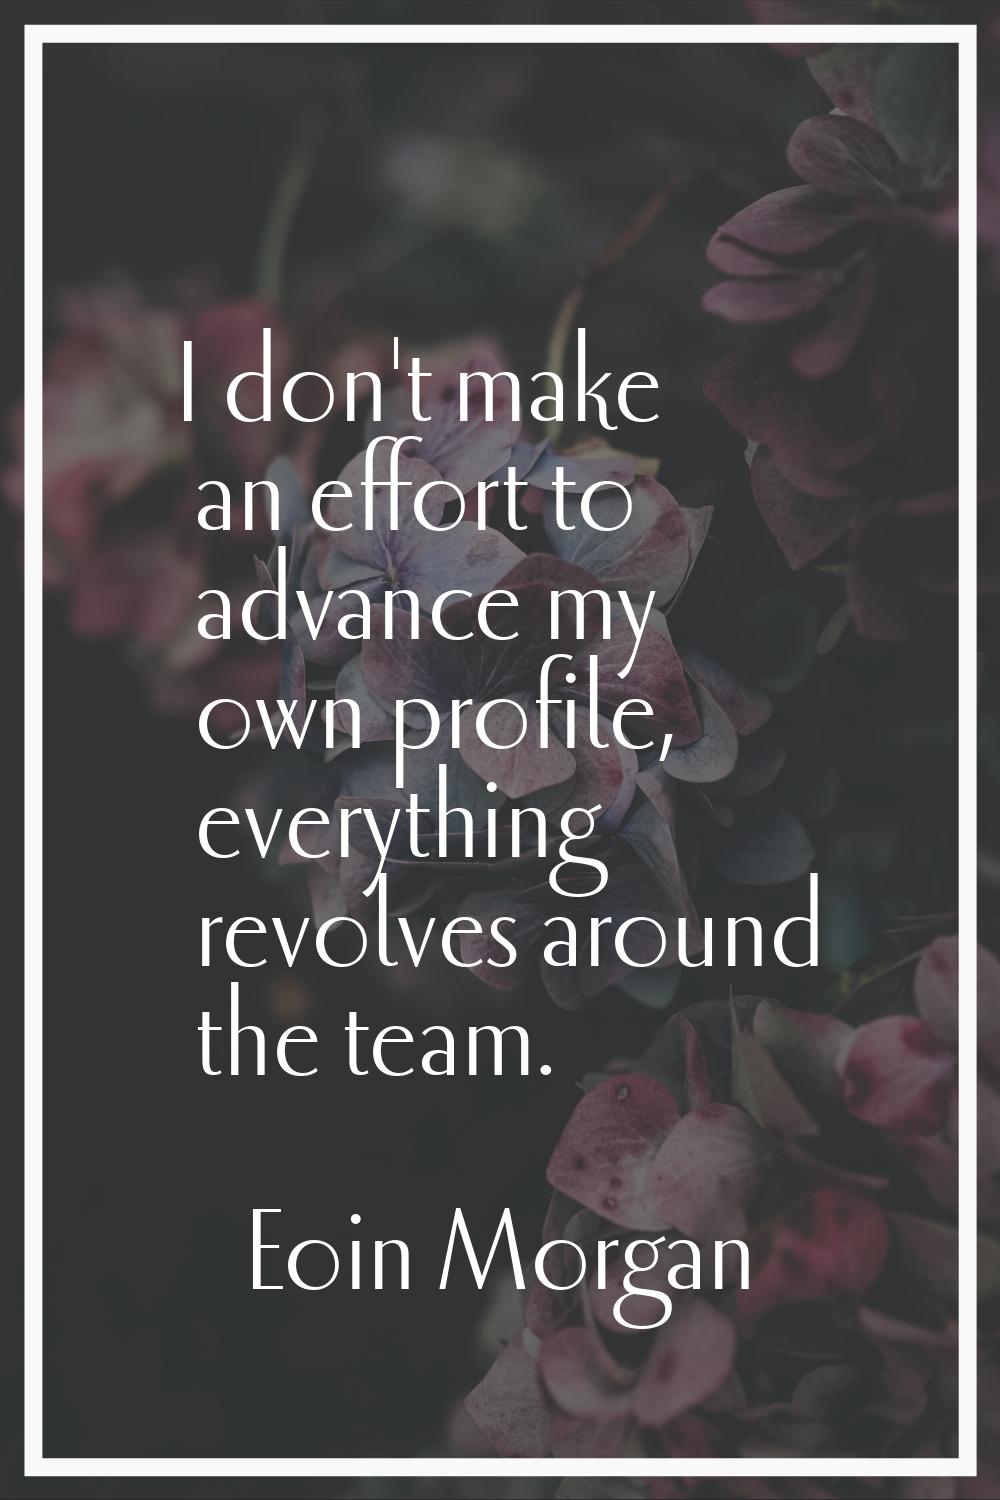 I don't make an effort to advance my own profile, everything revolves around the team.